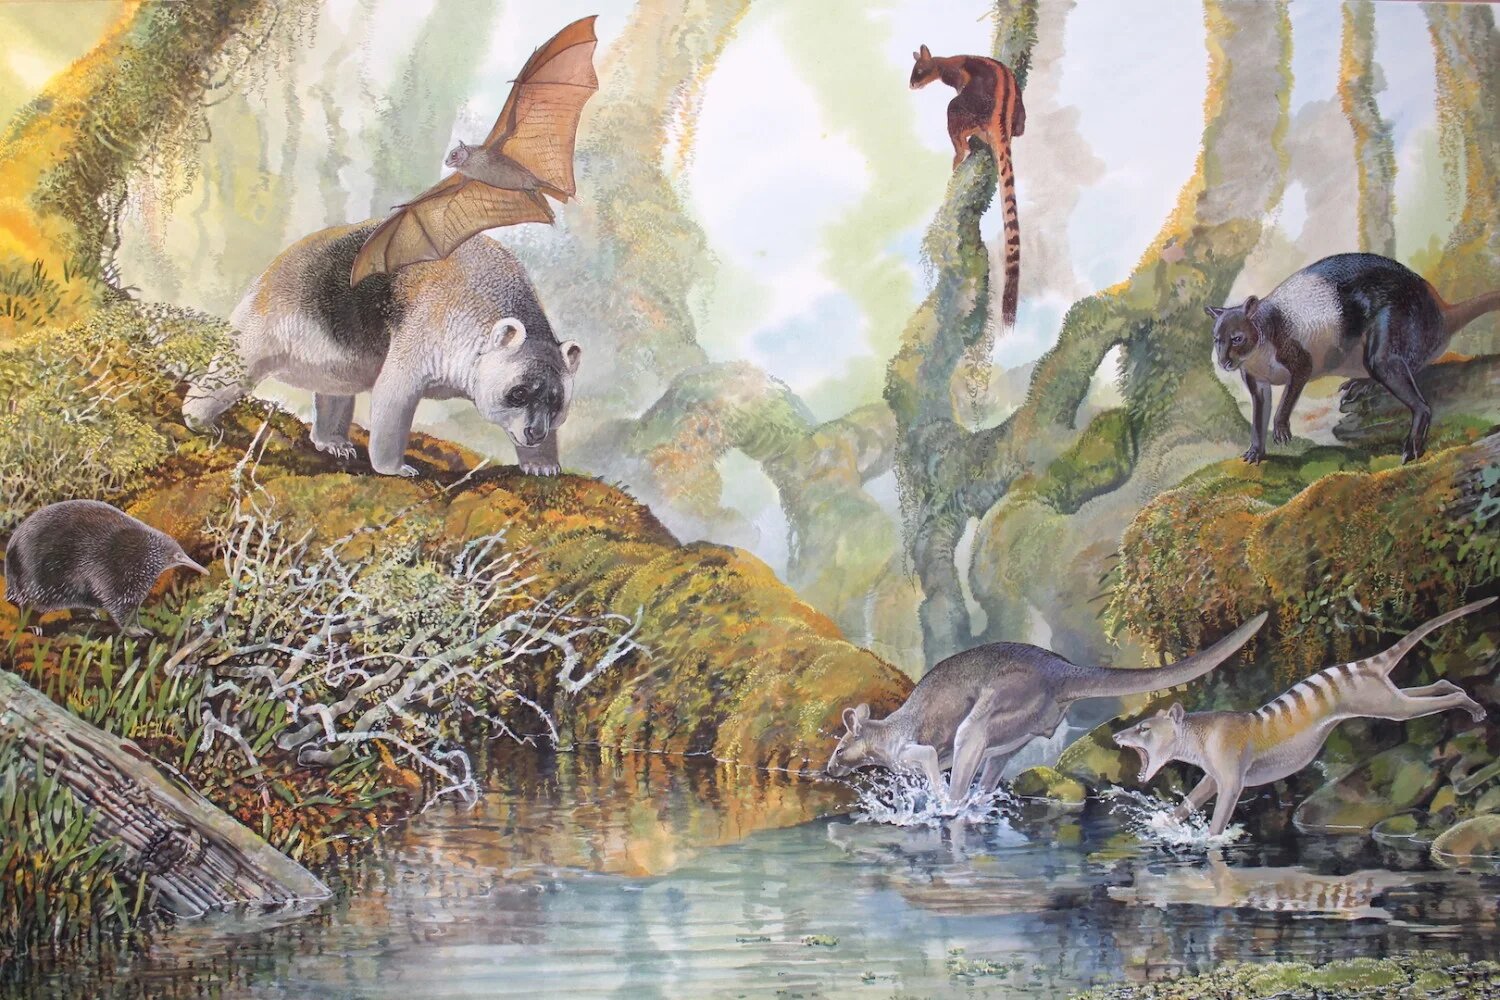 Scientists explain new kangaroo fossil from Papua New Guinea